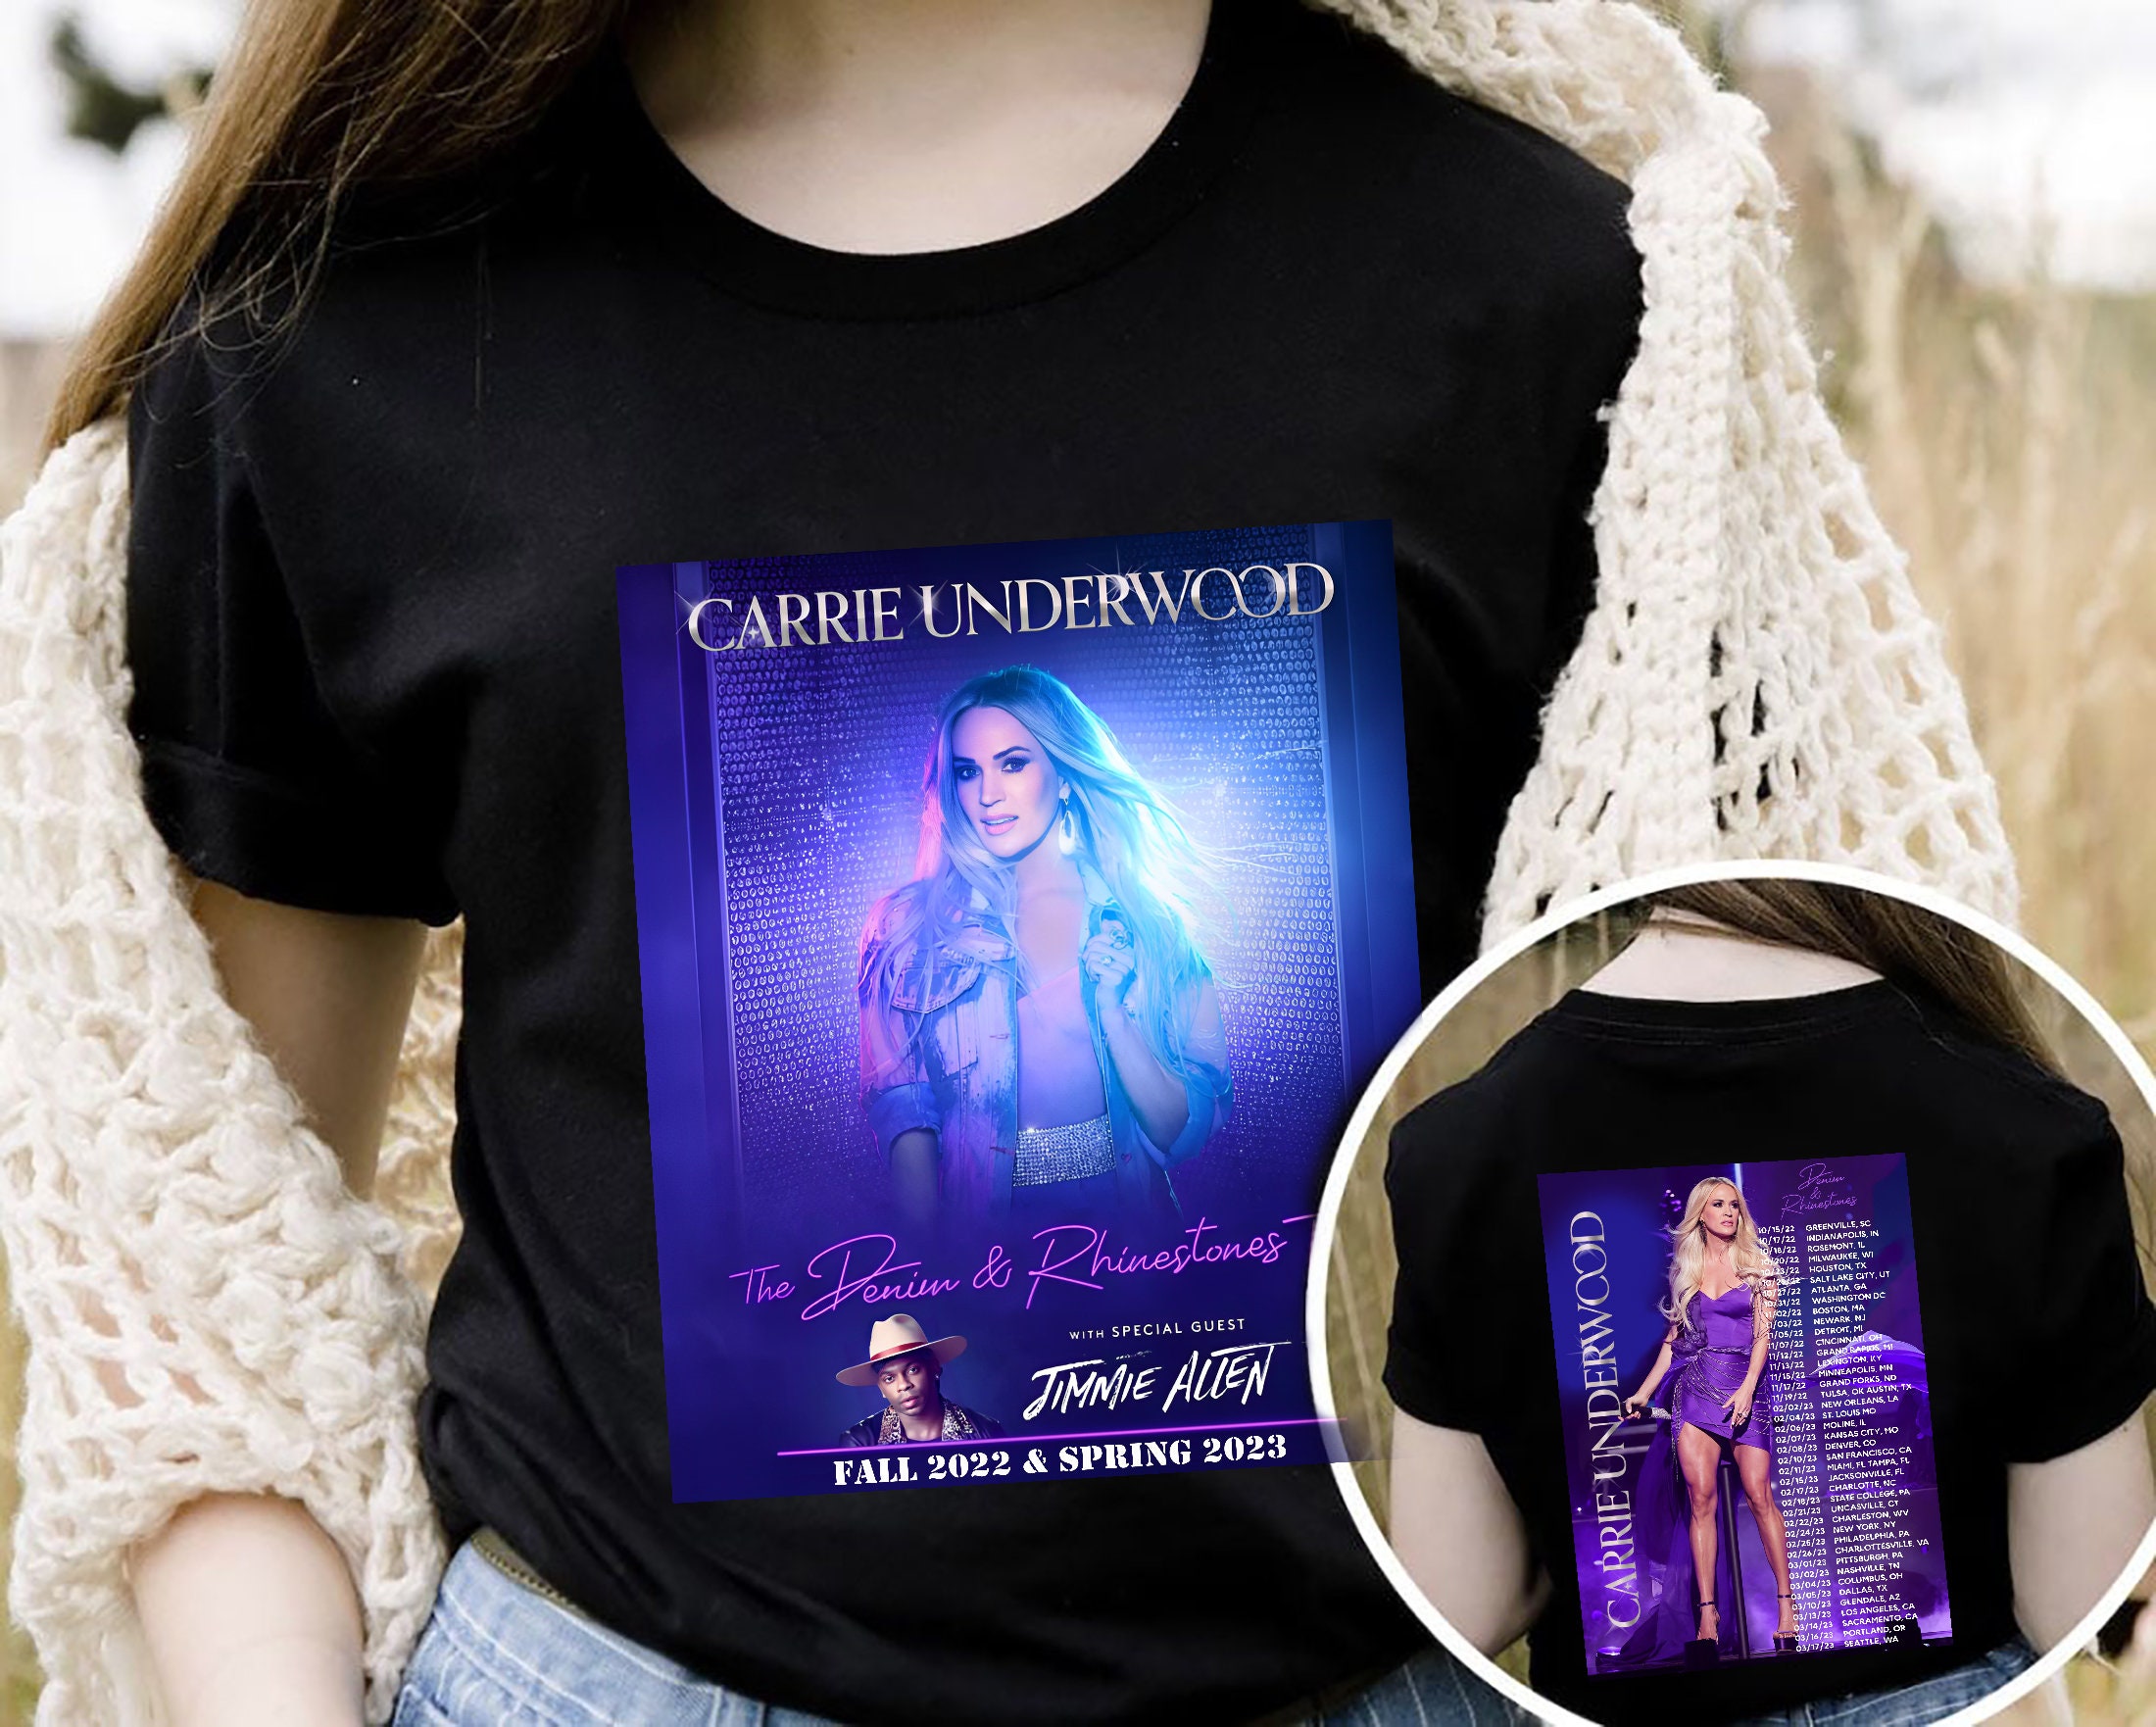 Carrie Underwood Tour 2023 Shirt, Carrie Underwood The Denim Rhinestones  Tour 2022 - 2023 Double Sided Shirt sold by Sheelah Church, SKU 38816083